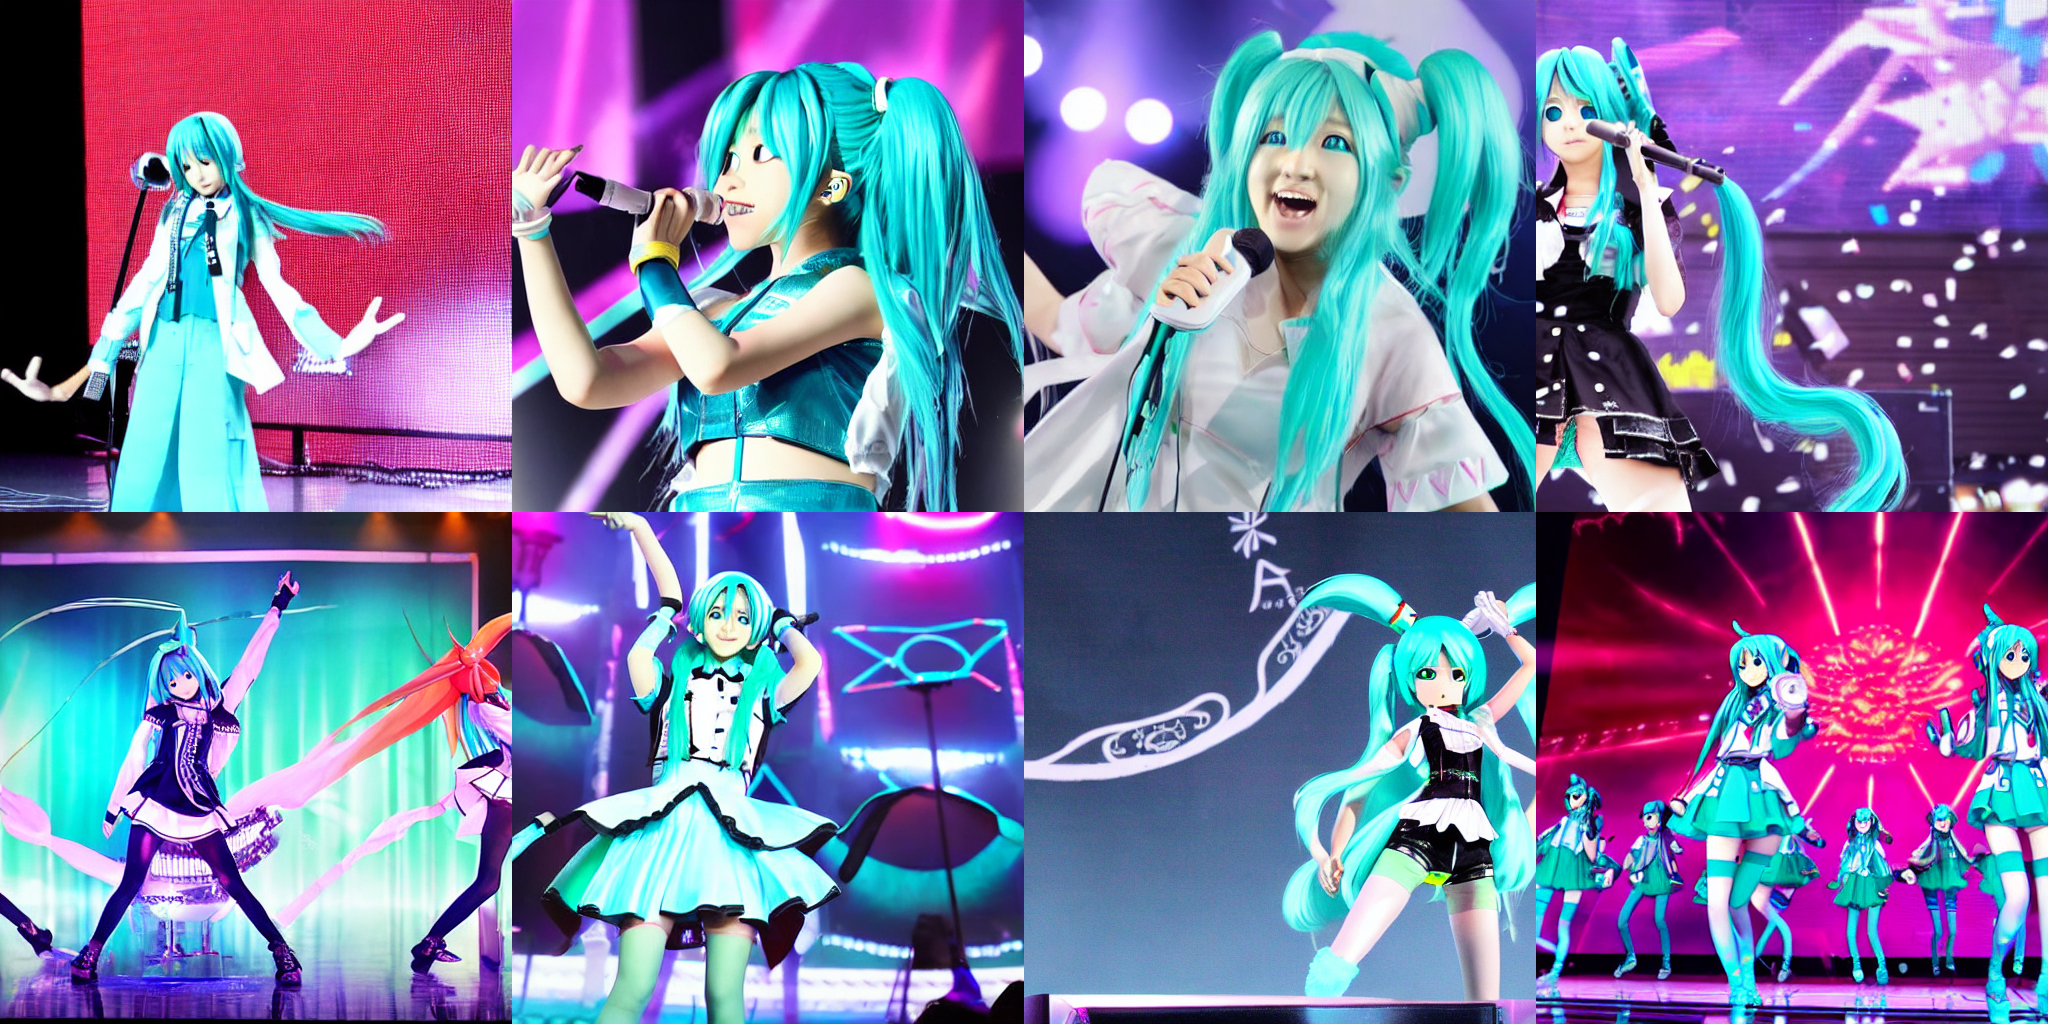 Hatsune_Miku_performing_live_on_stage_3.png